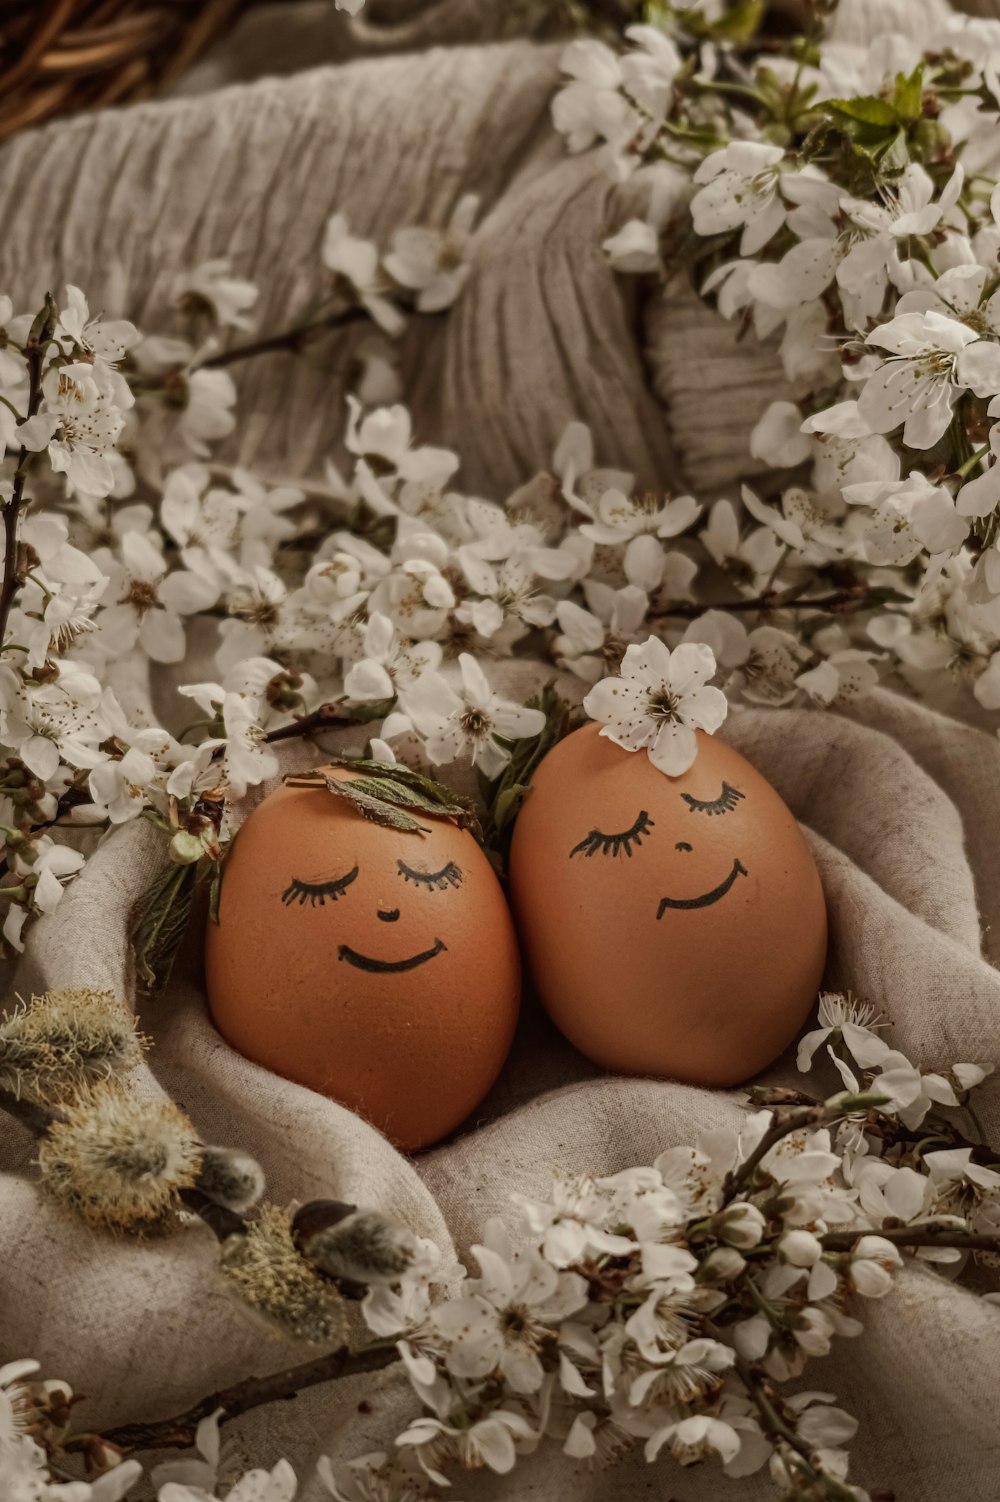 two eggs with faces drawn on them in a basket